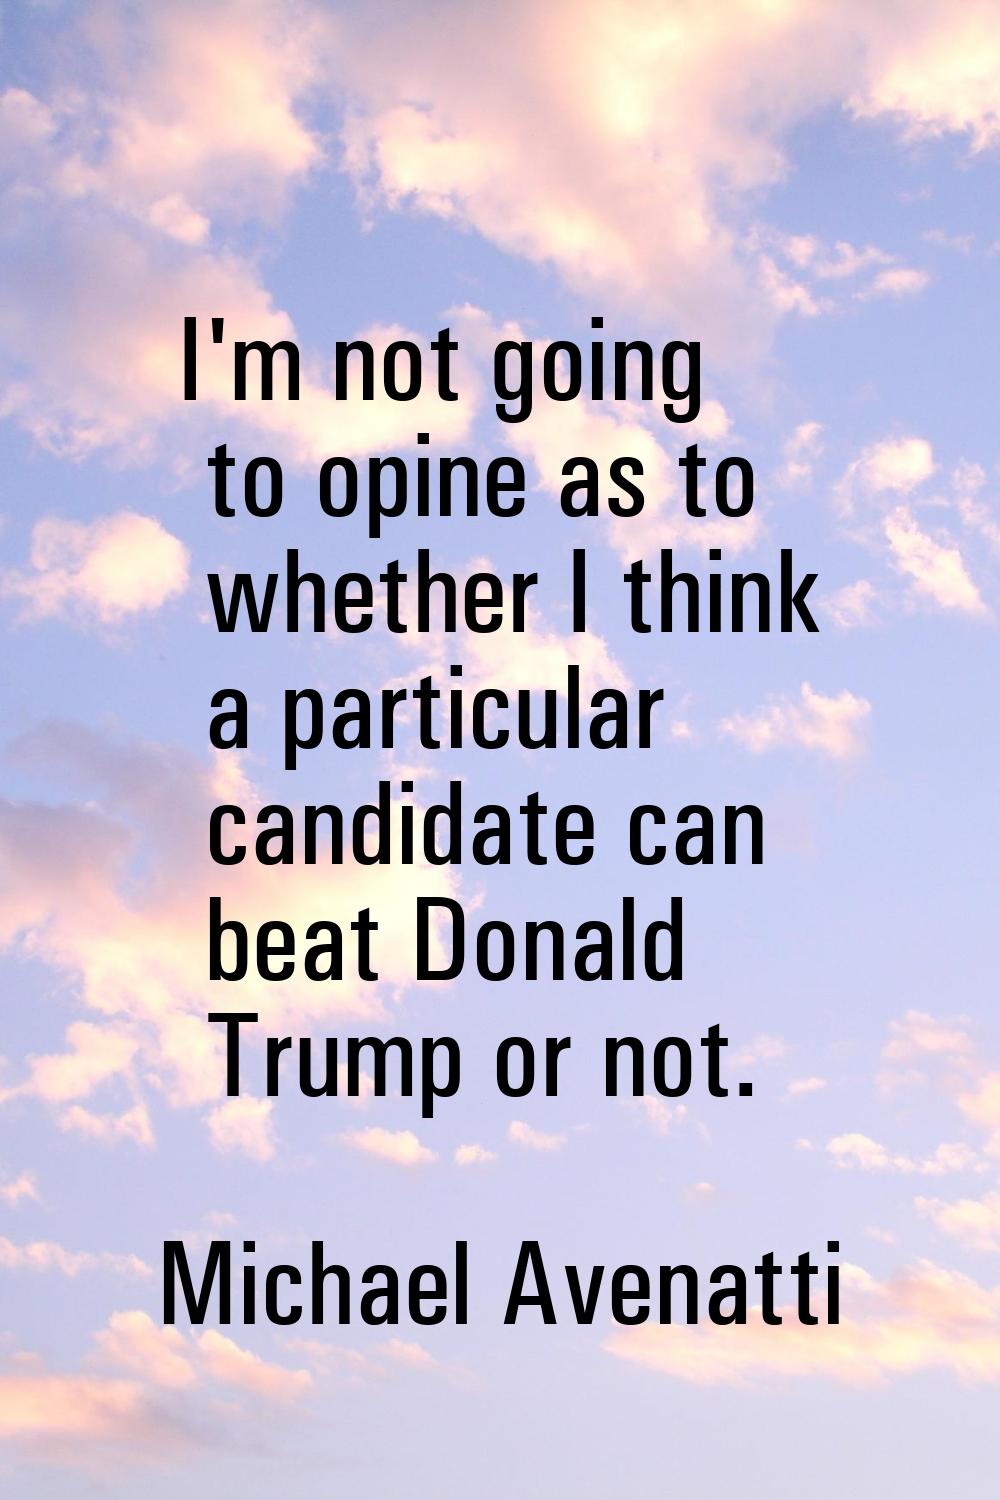 I'm not going to opine as to whether I think a particular candidate can beat Donald Trump or not.